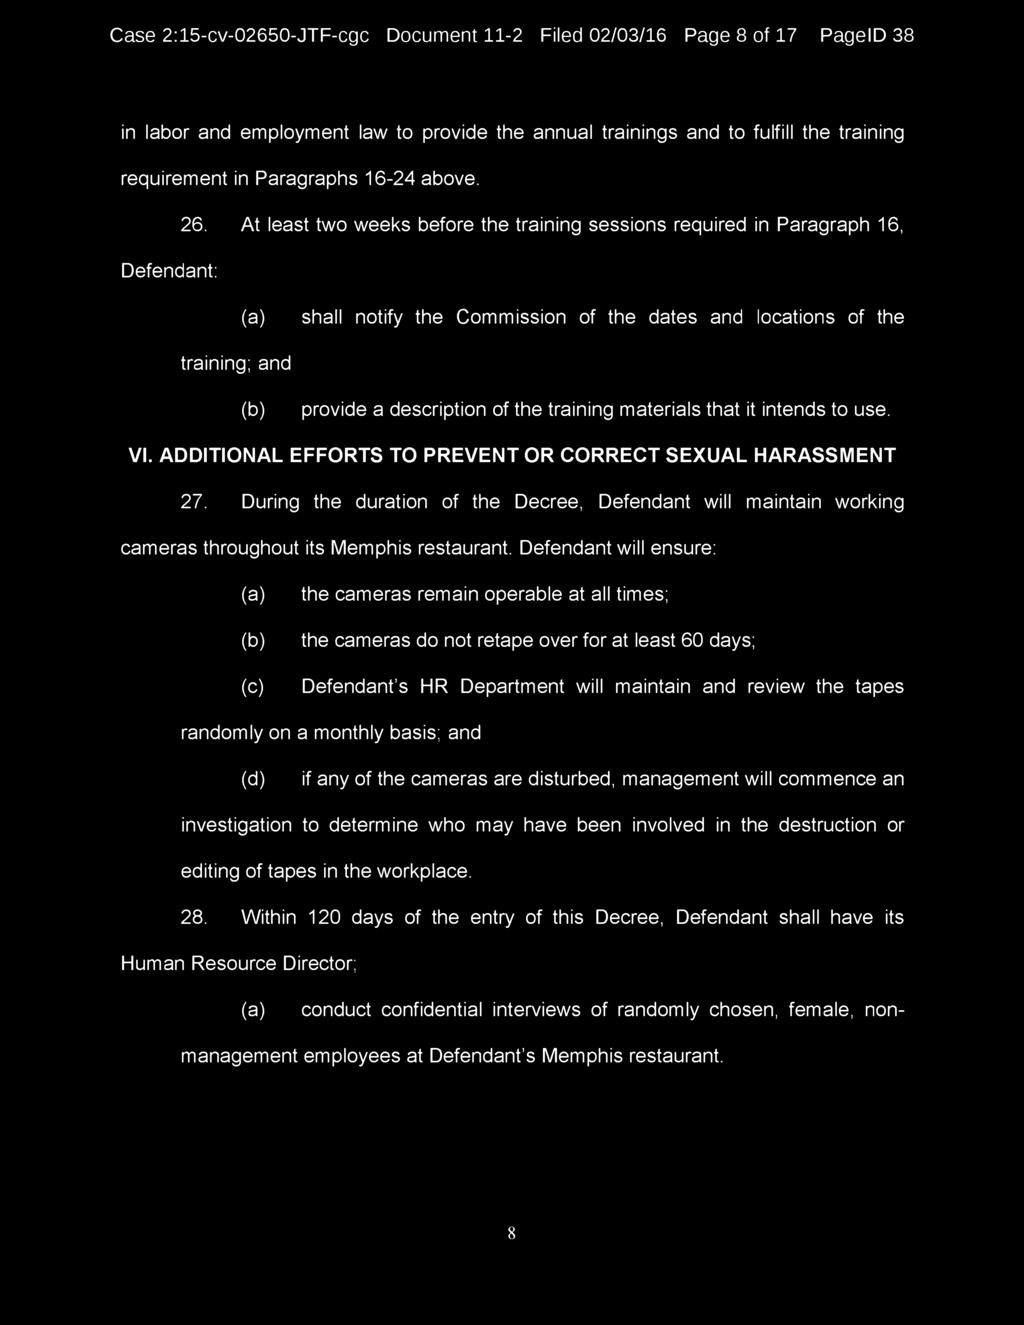 Case 2:15-cv-02650-JTF-cgc Document 11-2 Filed 02/03/16 Page 8 of 17 PagelD 38 in labor and employment law to provide the annual trainings and to fulfill the training requirement in Paragraphs 16-24